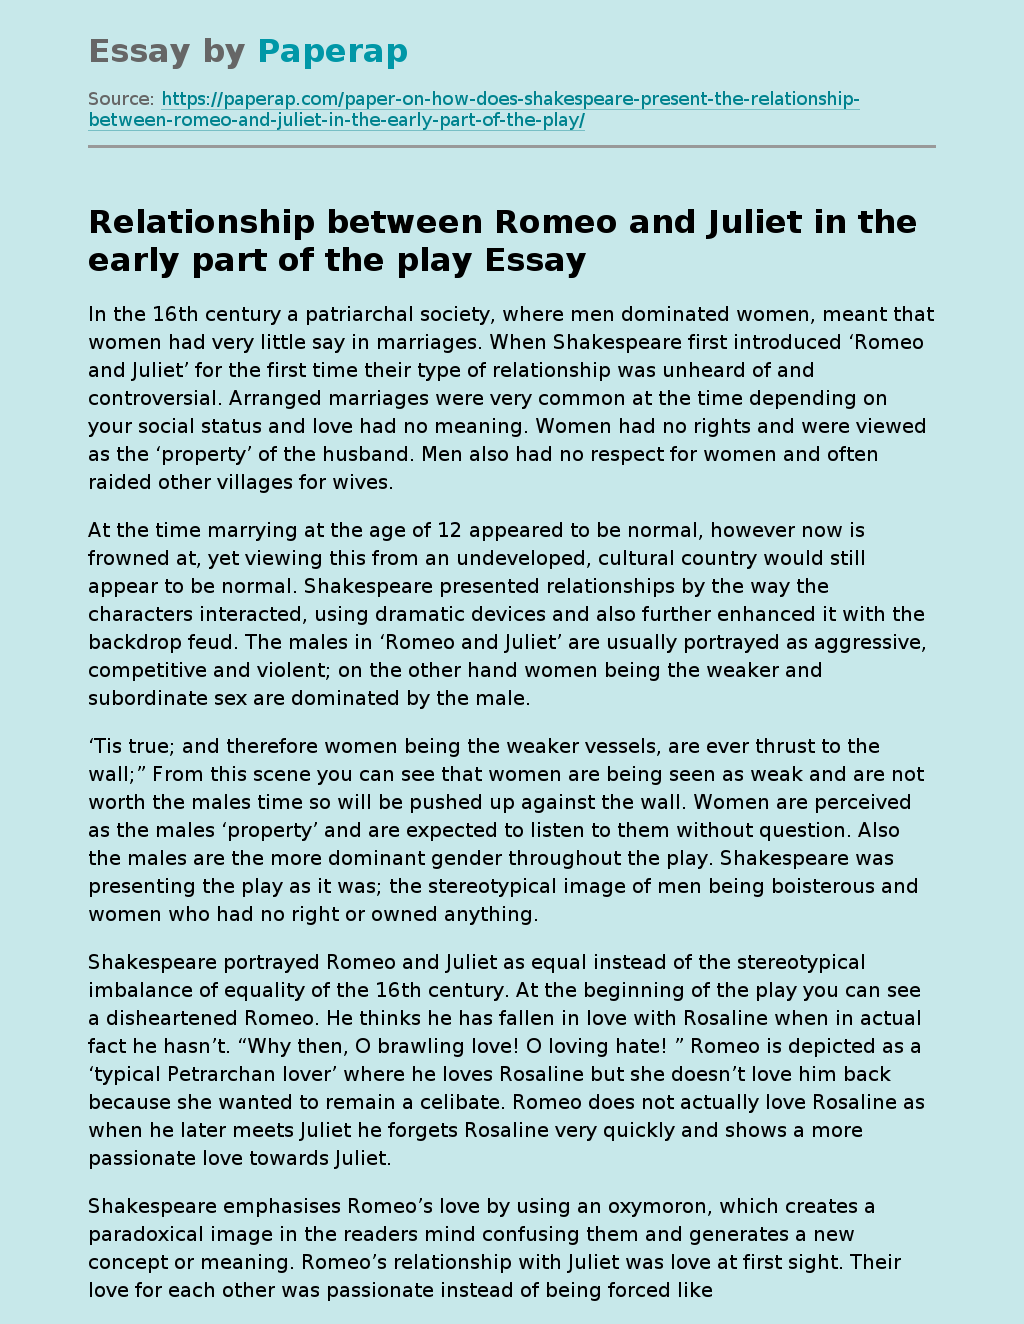 Relationship between Romeo and Juliet in the early part of the play